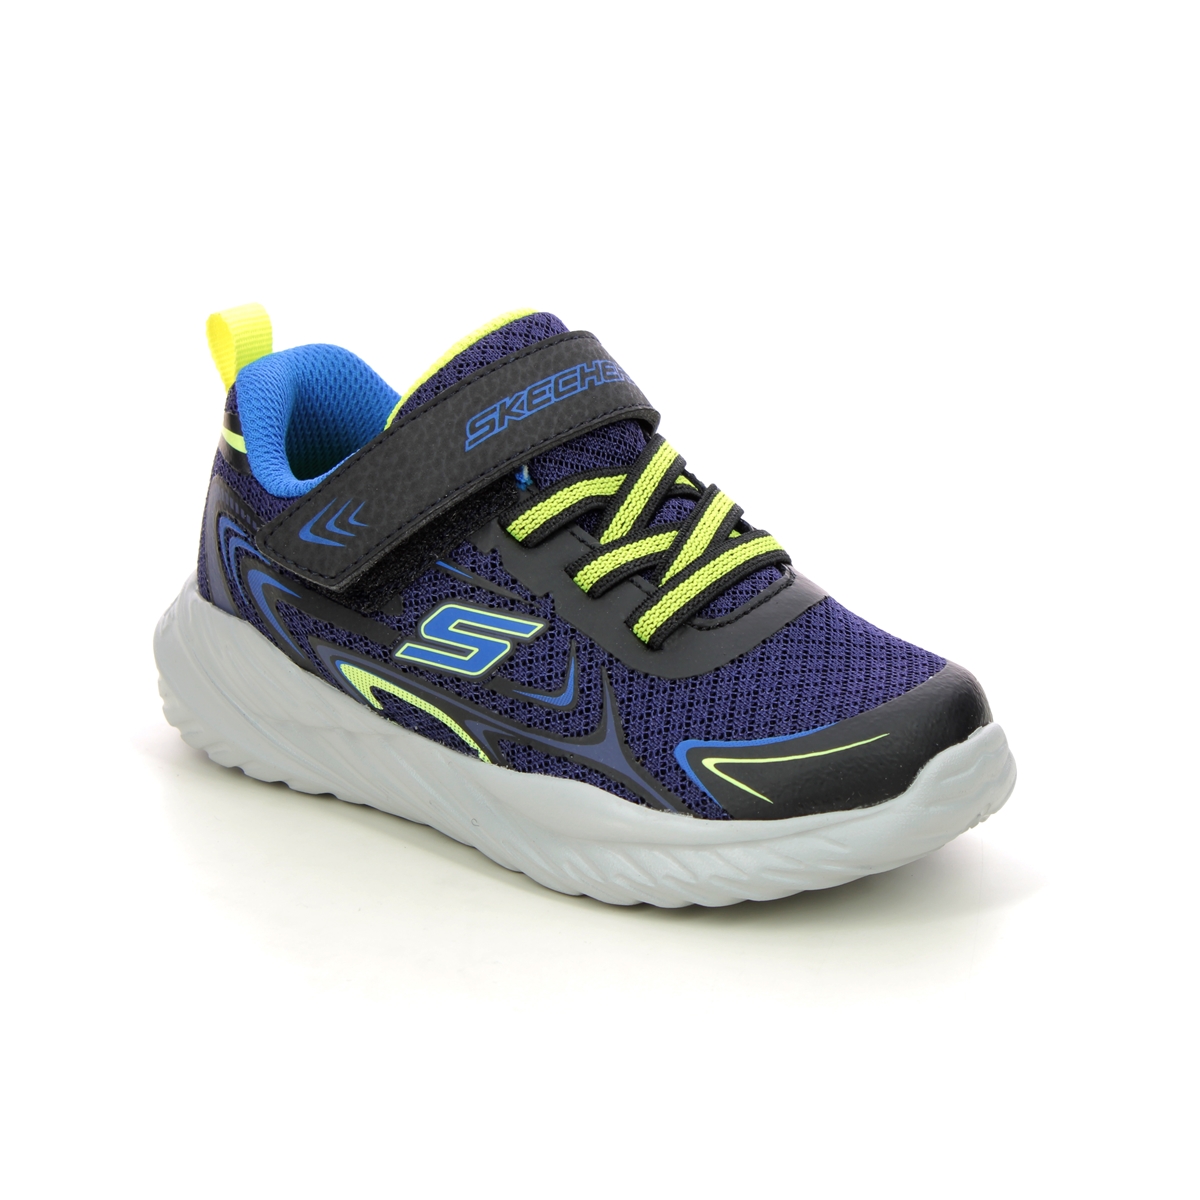 Skechers Lil Sprinter Navy Lime Kids Trainers 403887N In Size 22 In Plain Navy Lime For kids